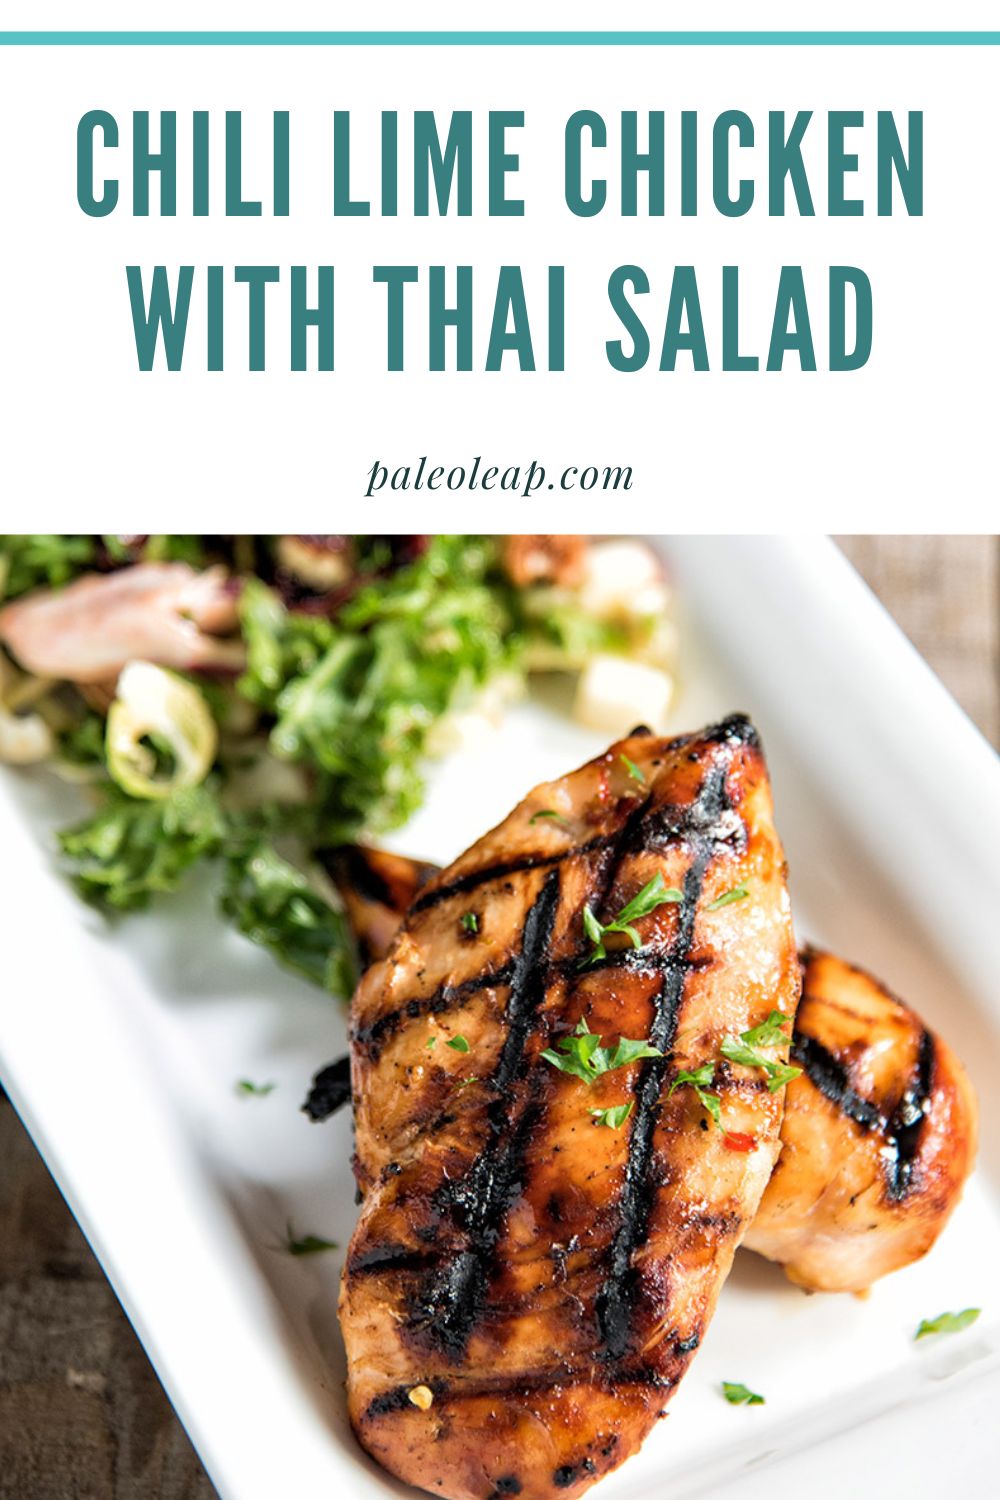 Chili Lime Chicken with Thai Salad Recipe | Paleo Leap